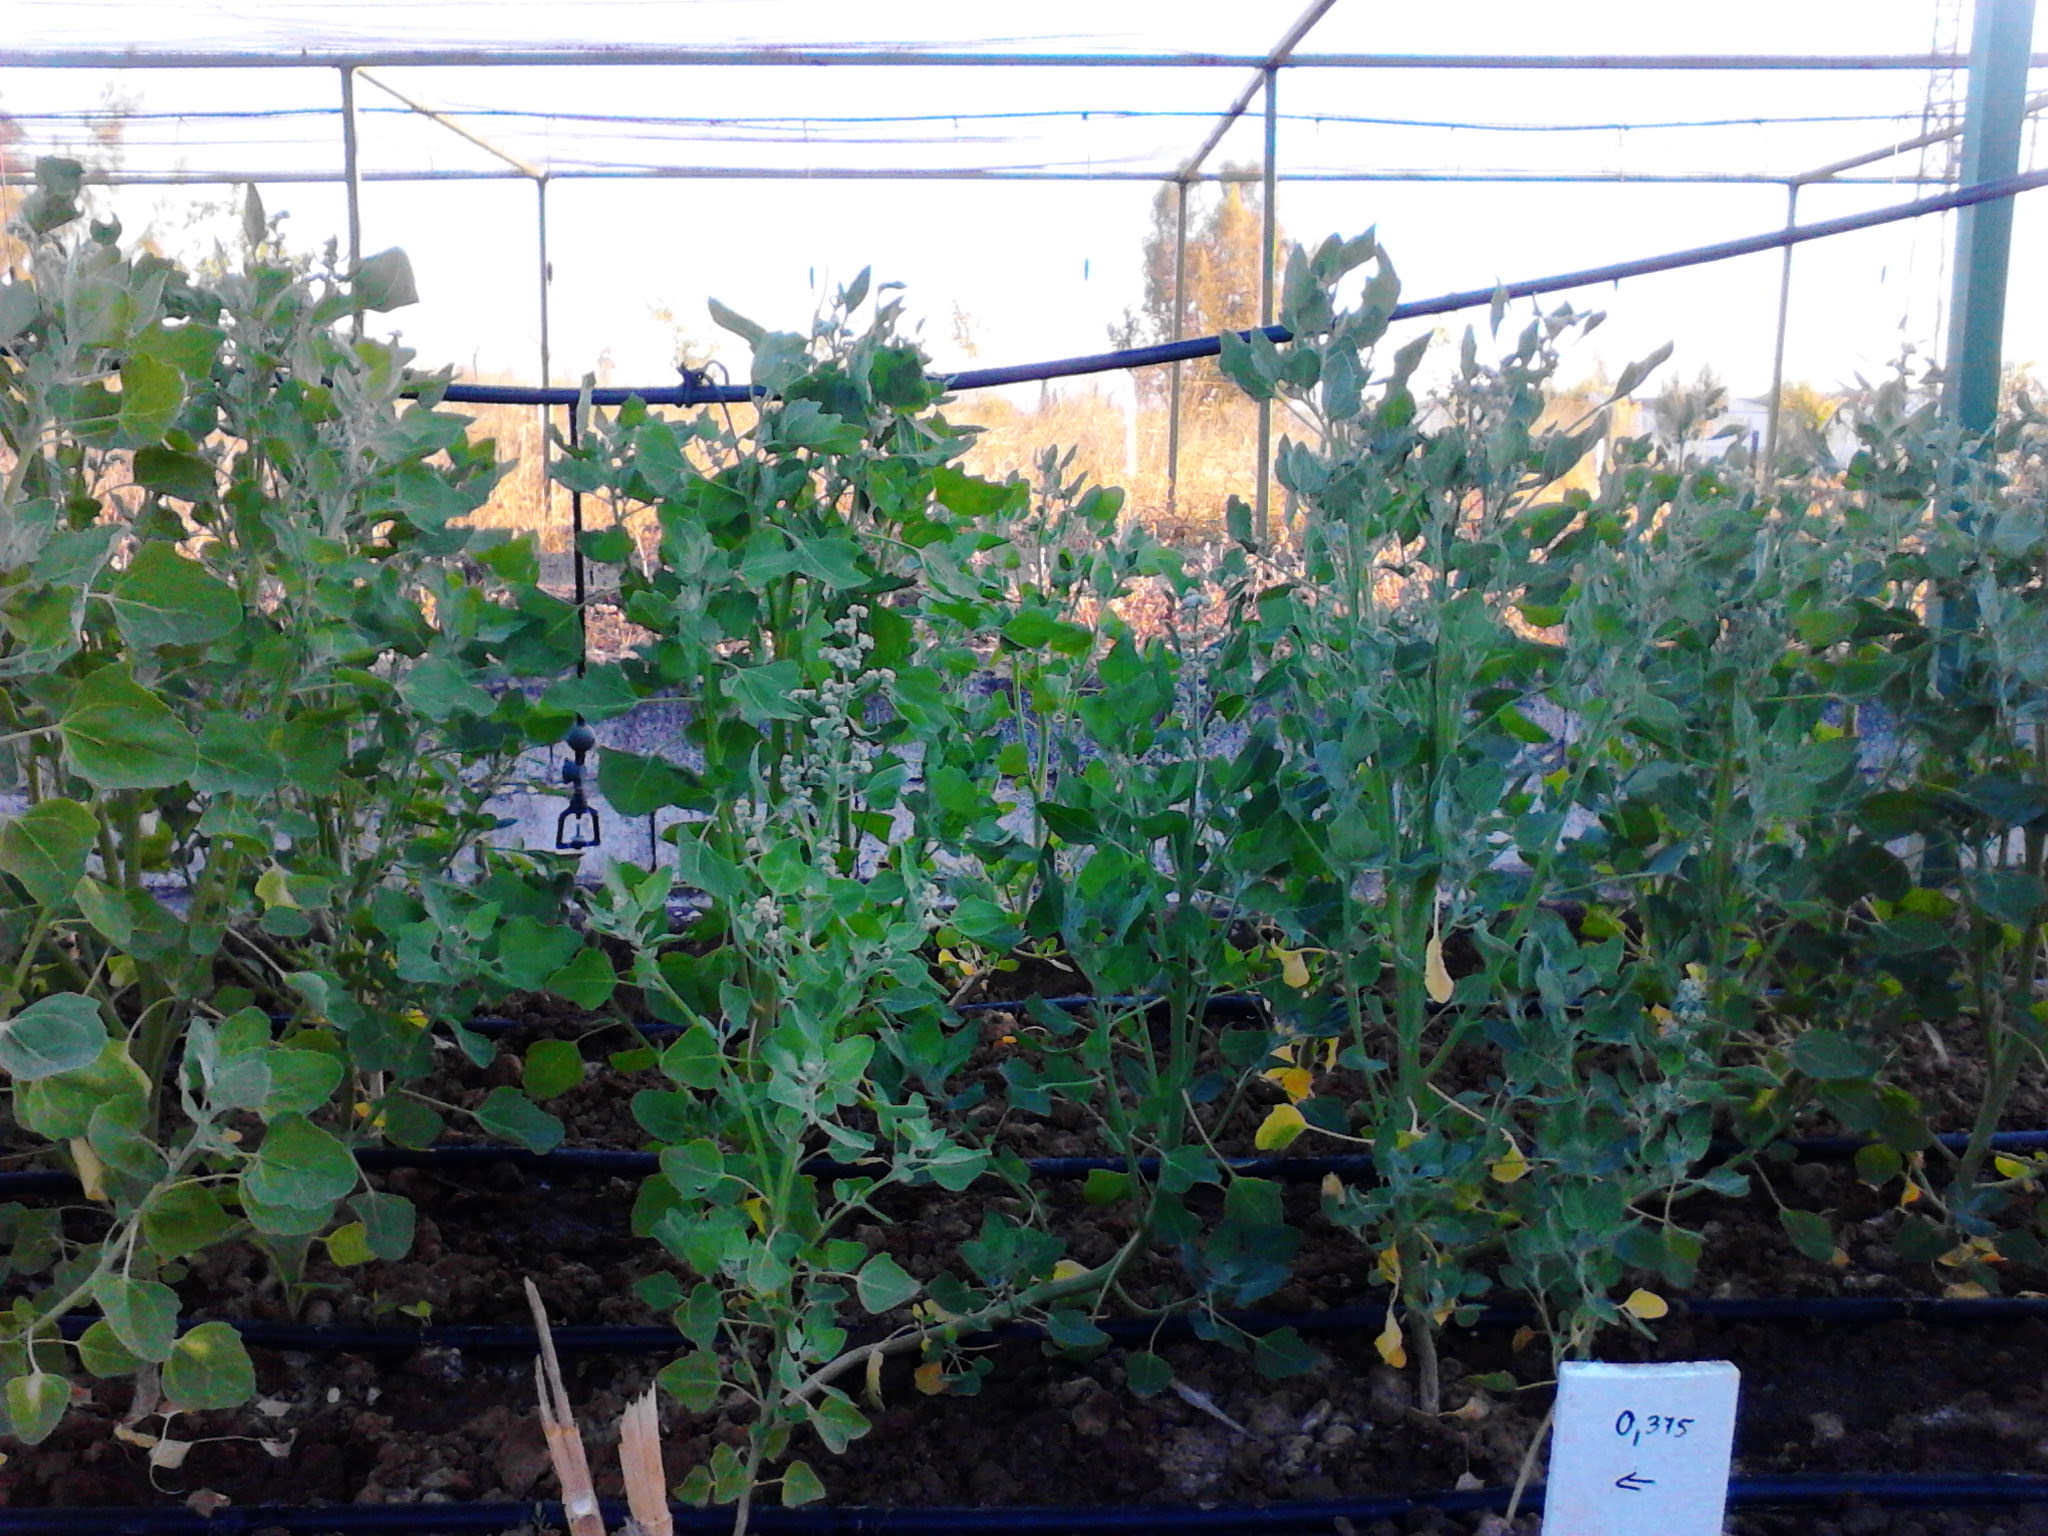 Monitoring of phenological adaptation in new varieties of quinoa